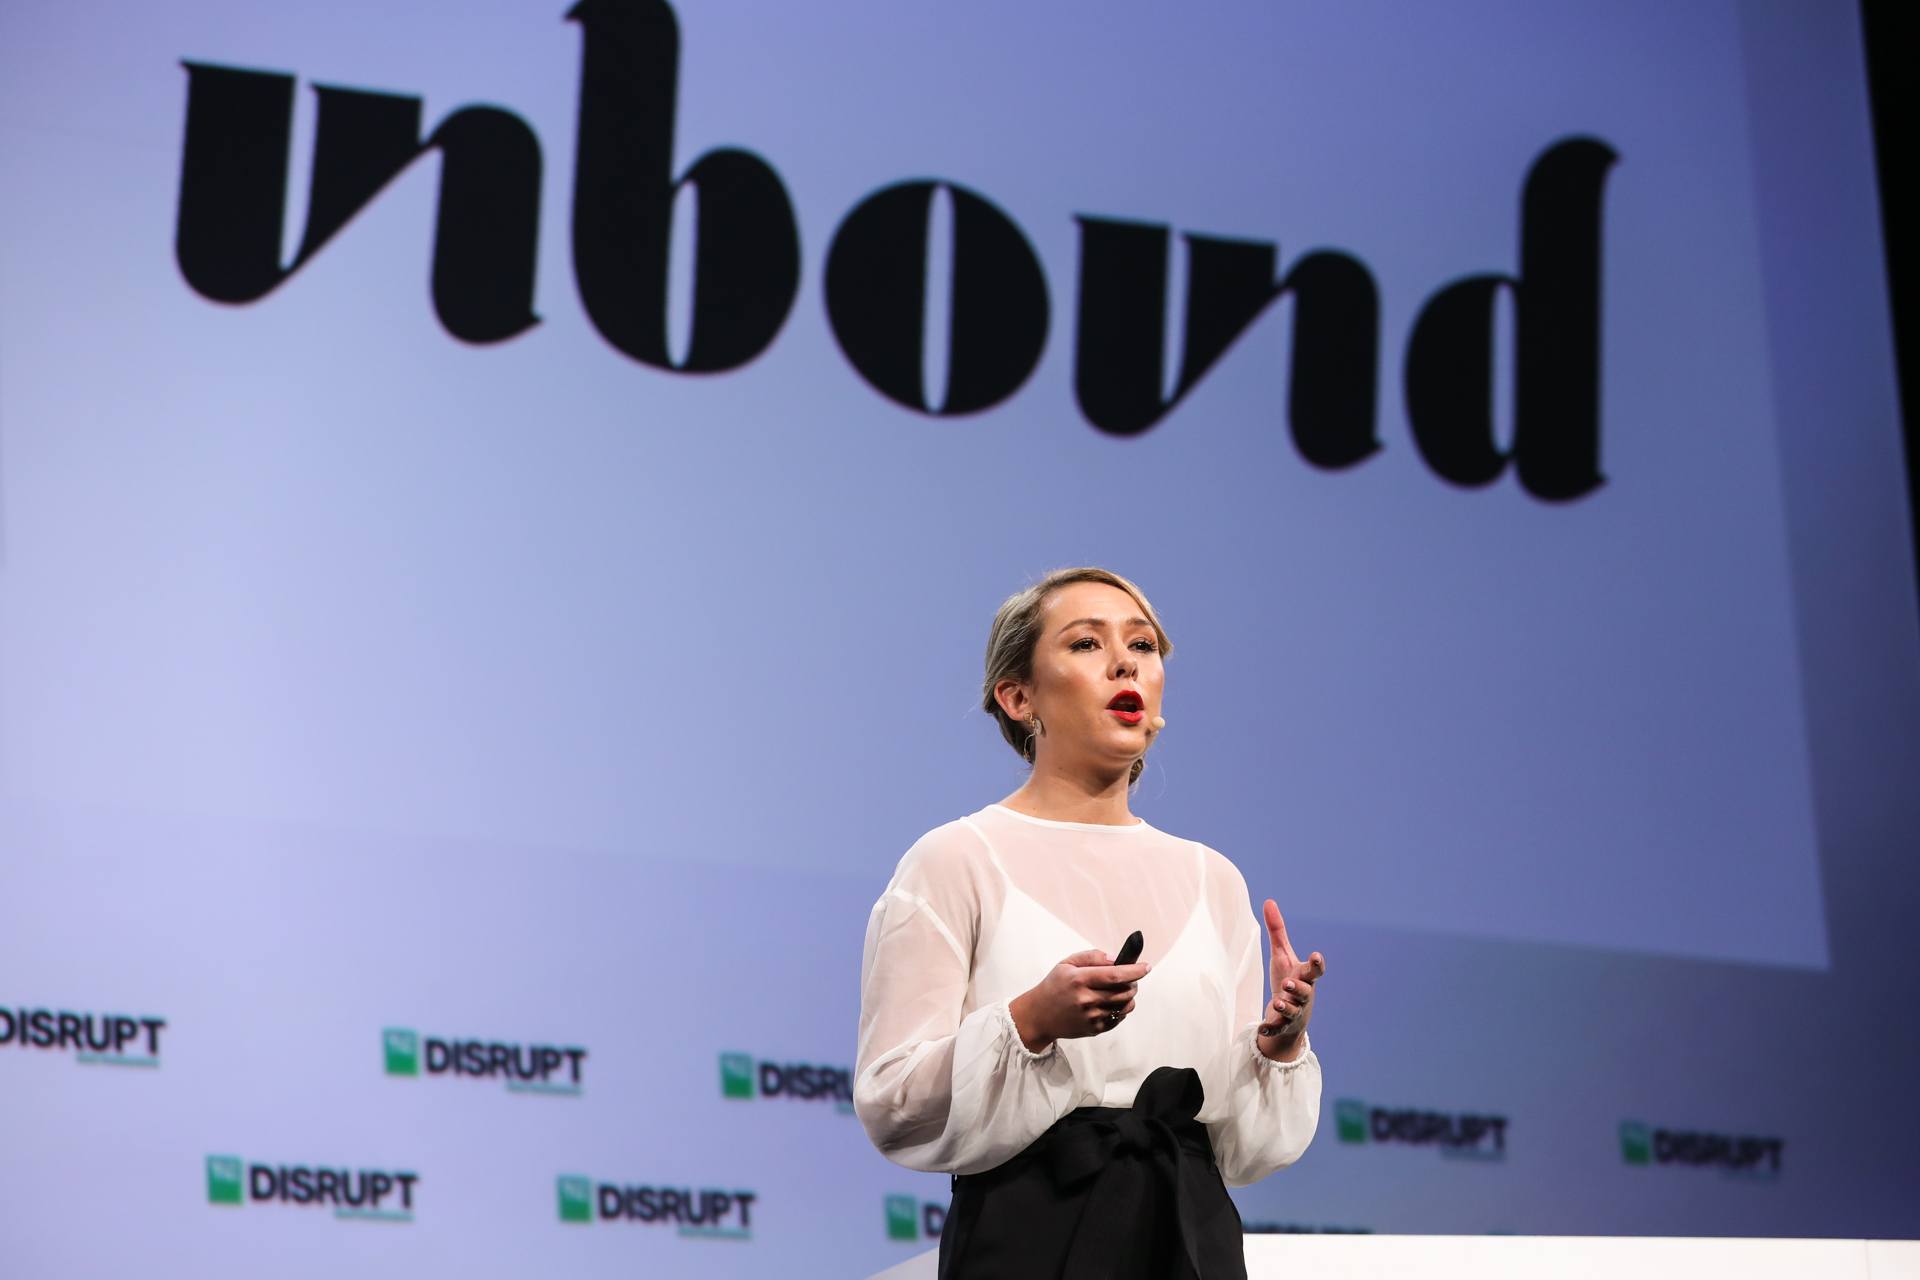 Unbound CEO Polly Rodriguez. The startup was a finalist at TC Disrupt SF Startup Battlefield finalist in 2018.